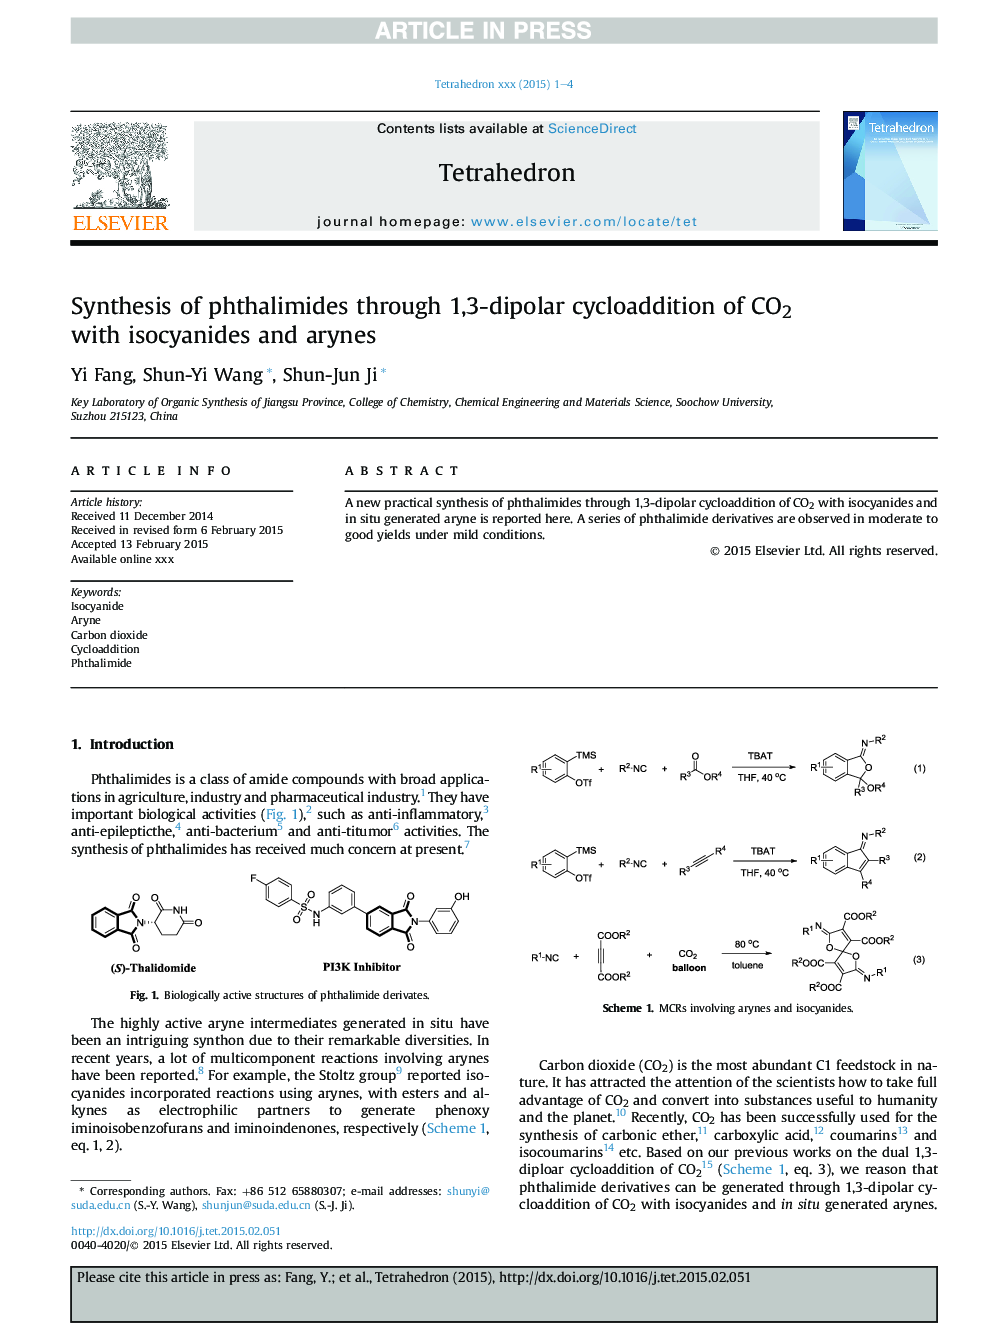 Synthesis of phthalimides through 1,3-dipolar cycloaddition of CO2 with isocyanides and arynes